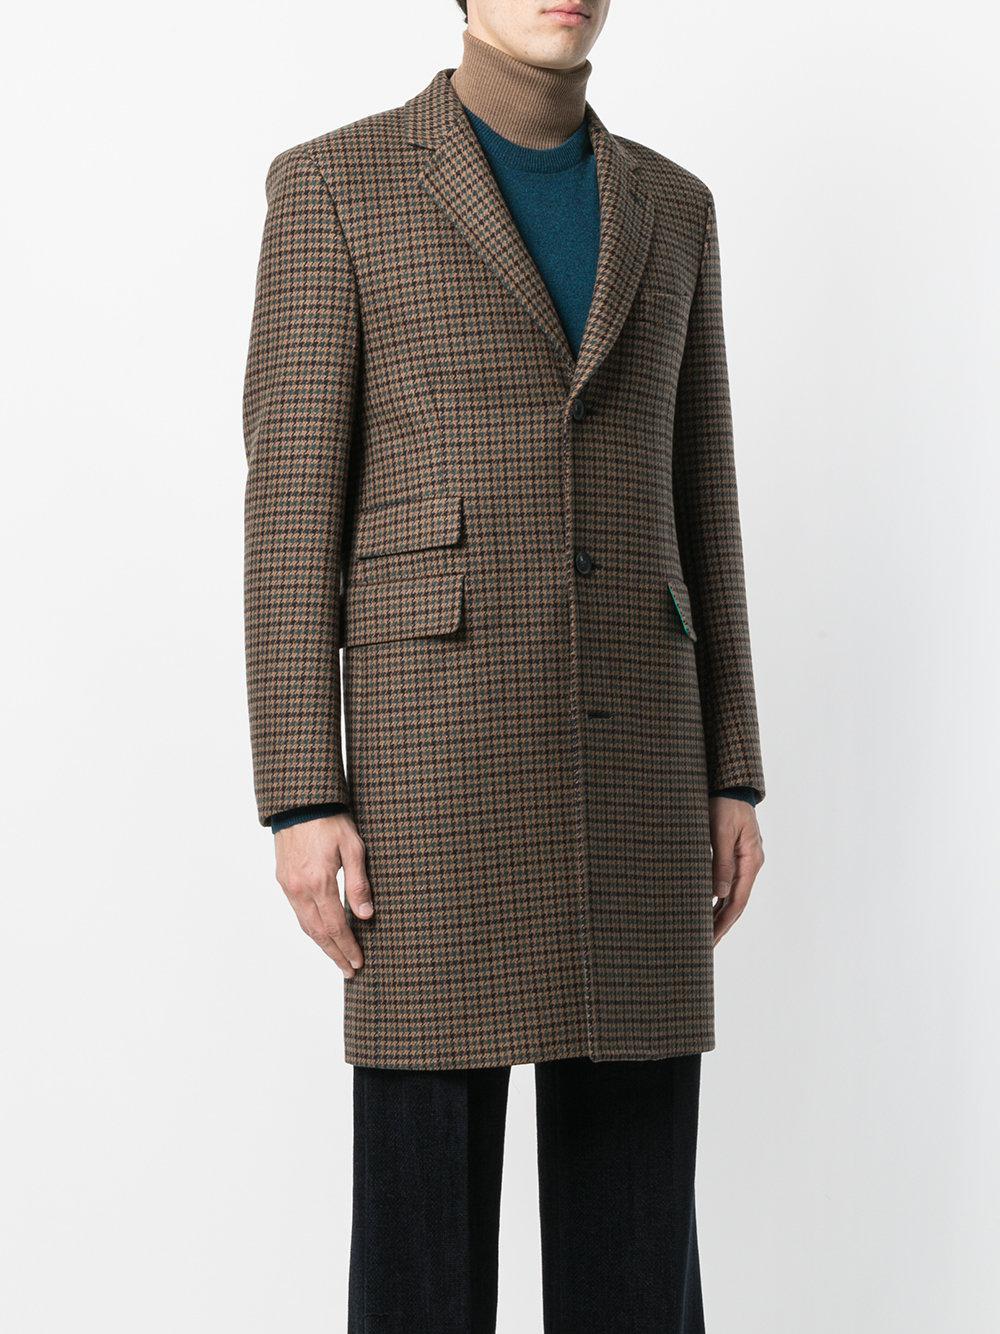 Lyst - Paul Smith Single-breasted Check Coat in Brown for Men